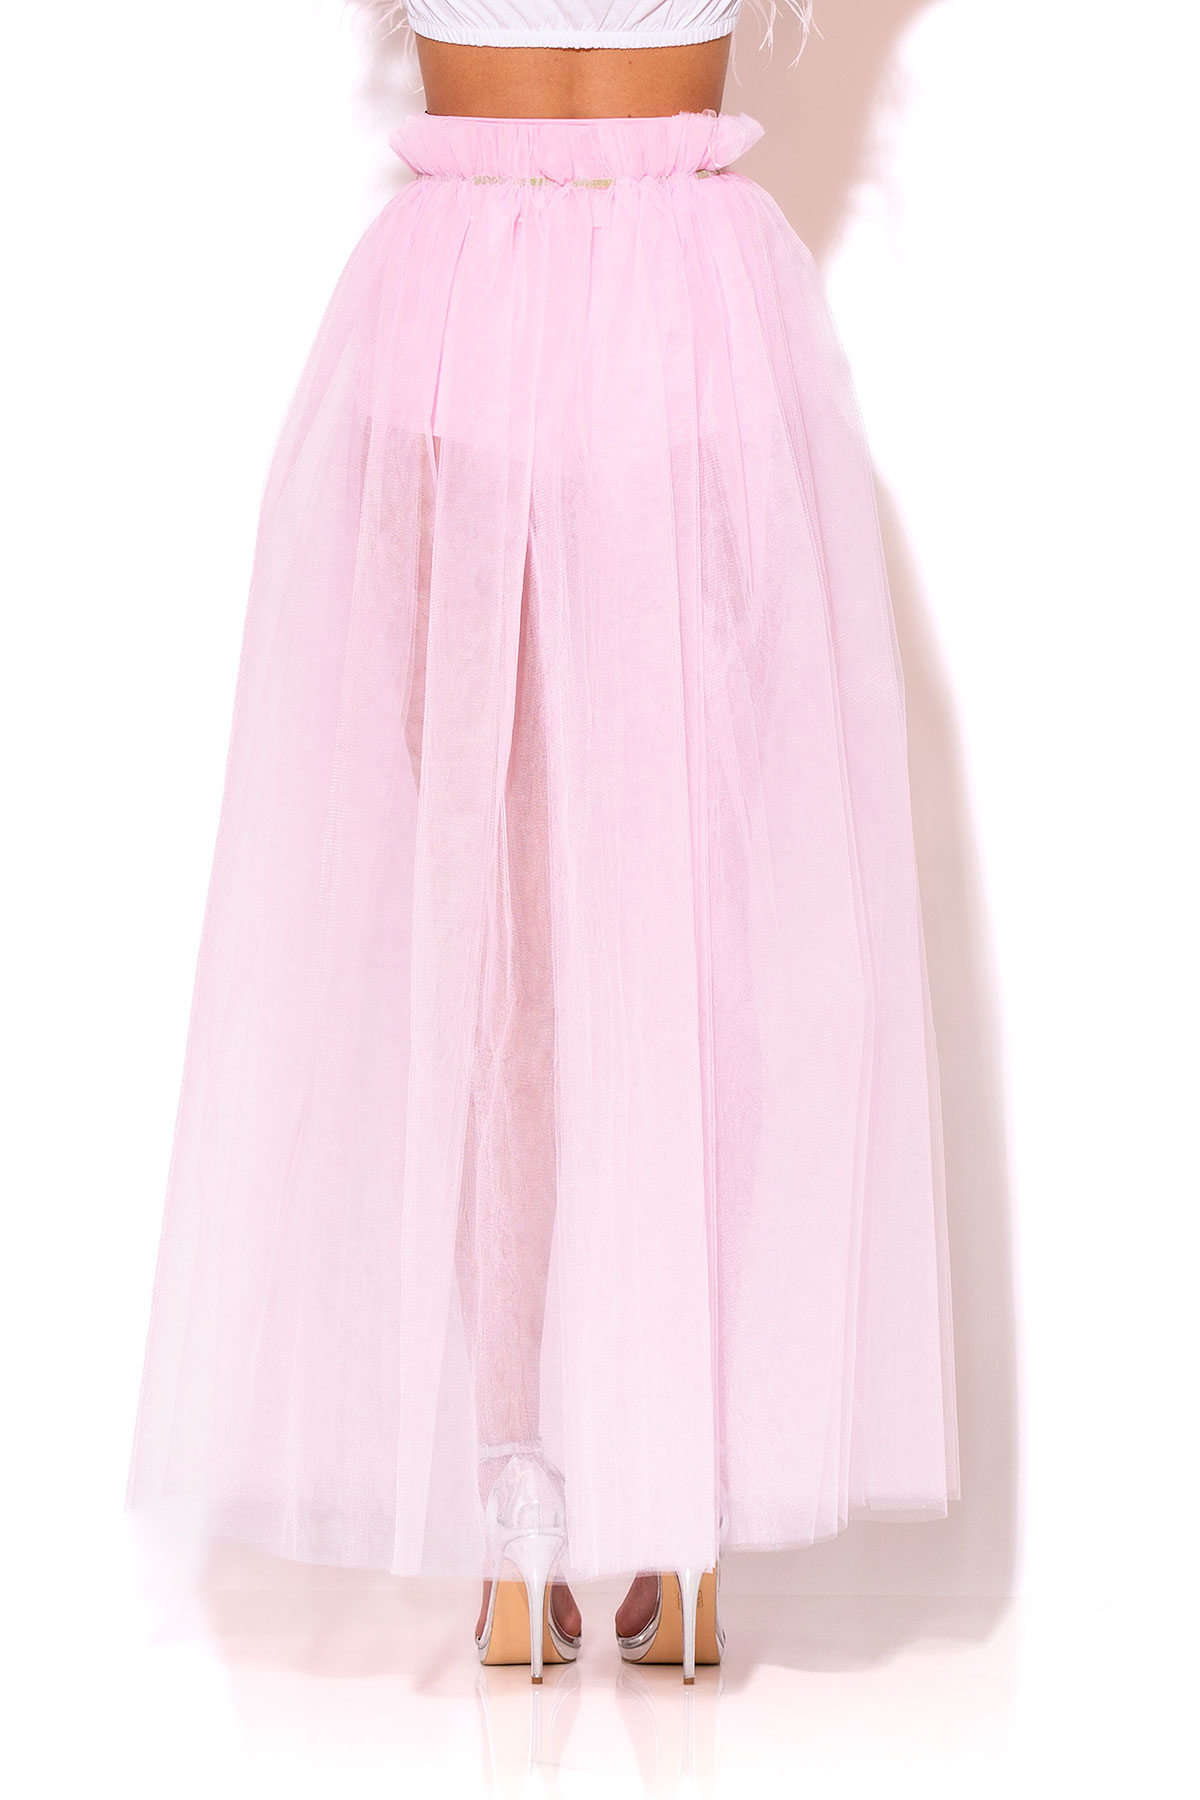 Chelsea. Long Slit Soft Tulle Skirt - Golden Hour Peach, BLUISH, Canada —  Tulle shop with a heart